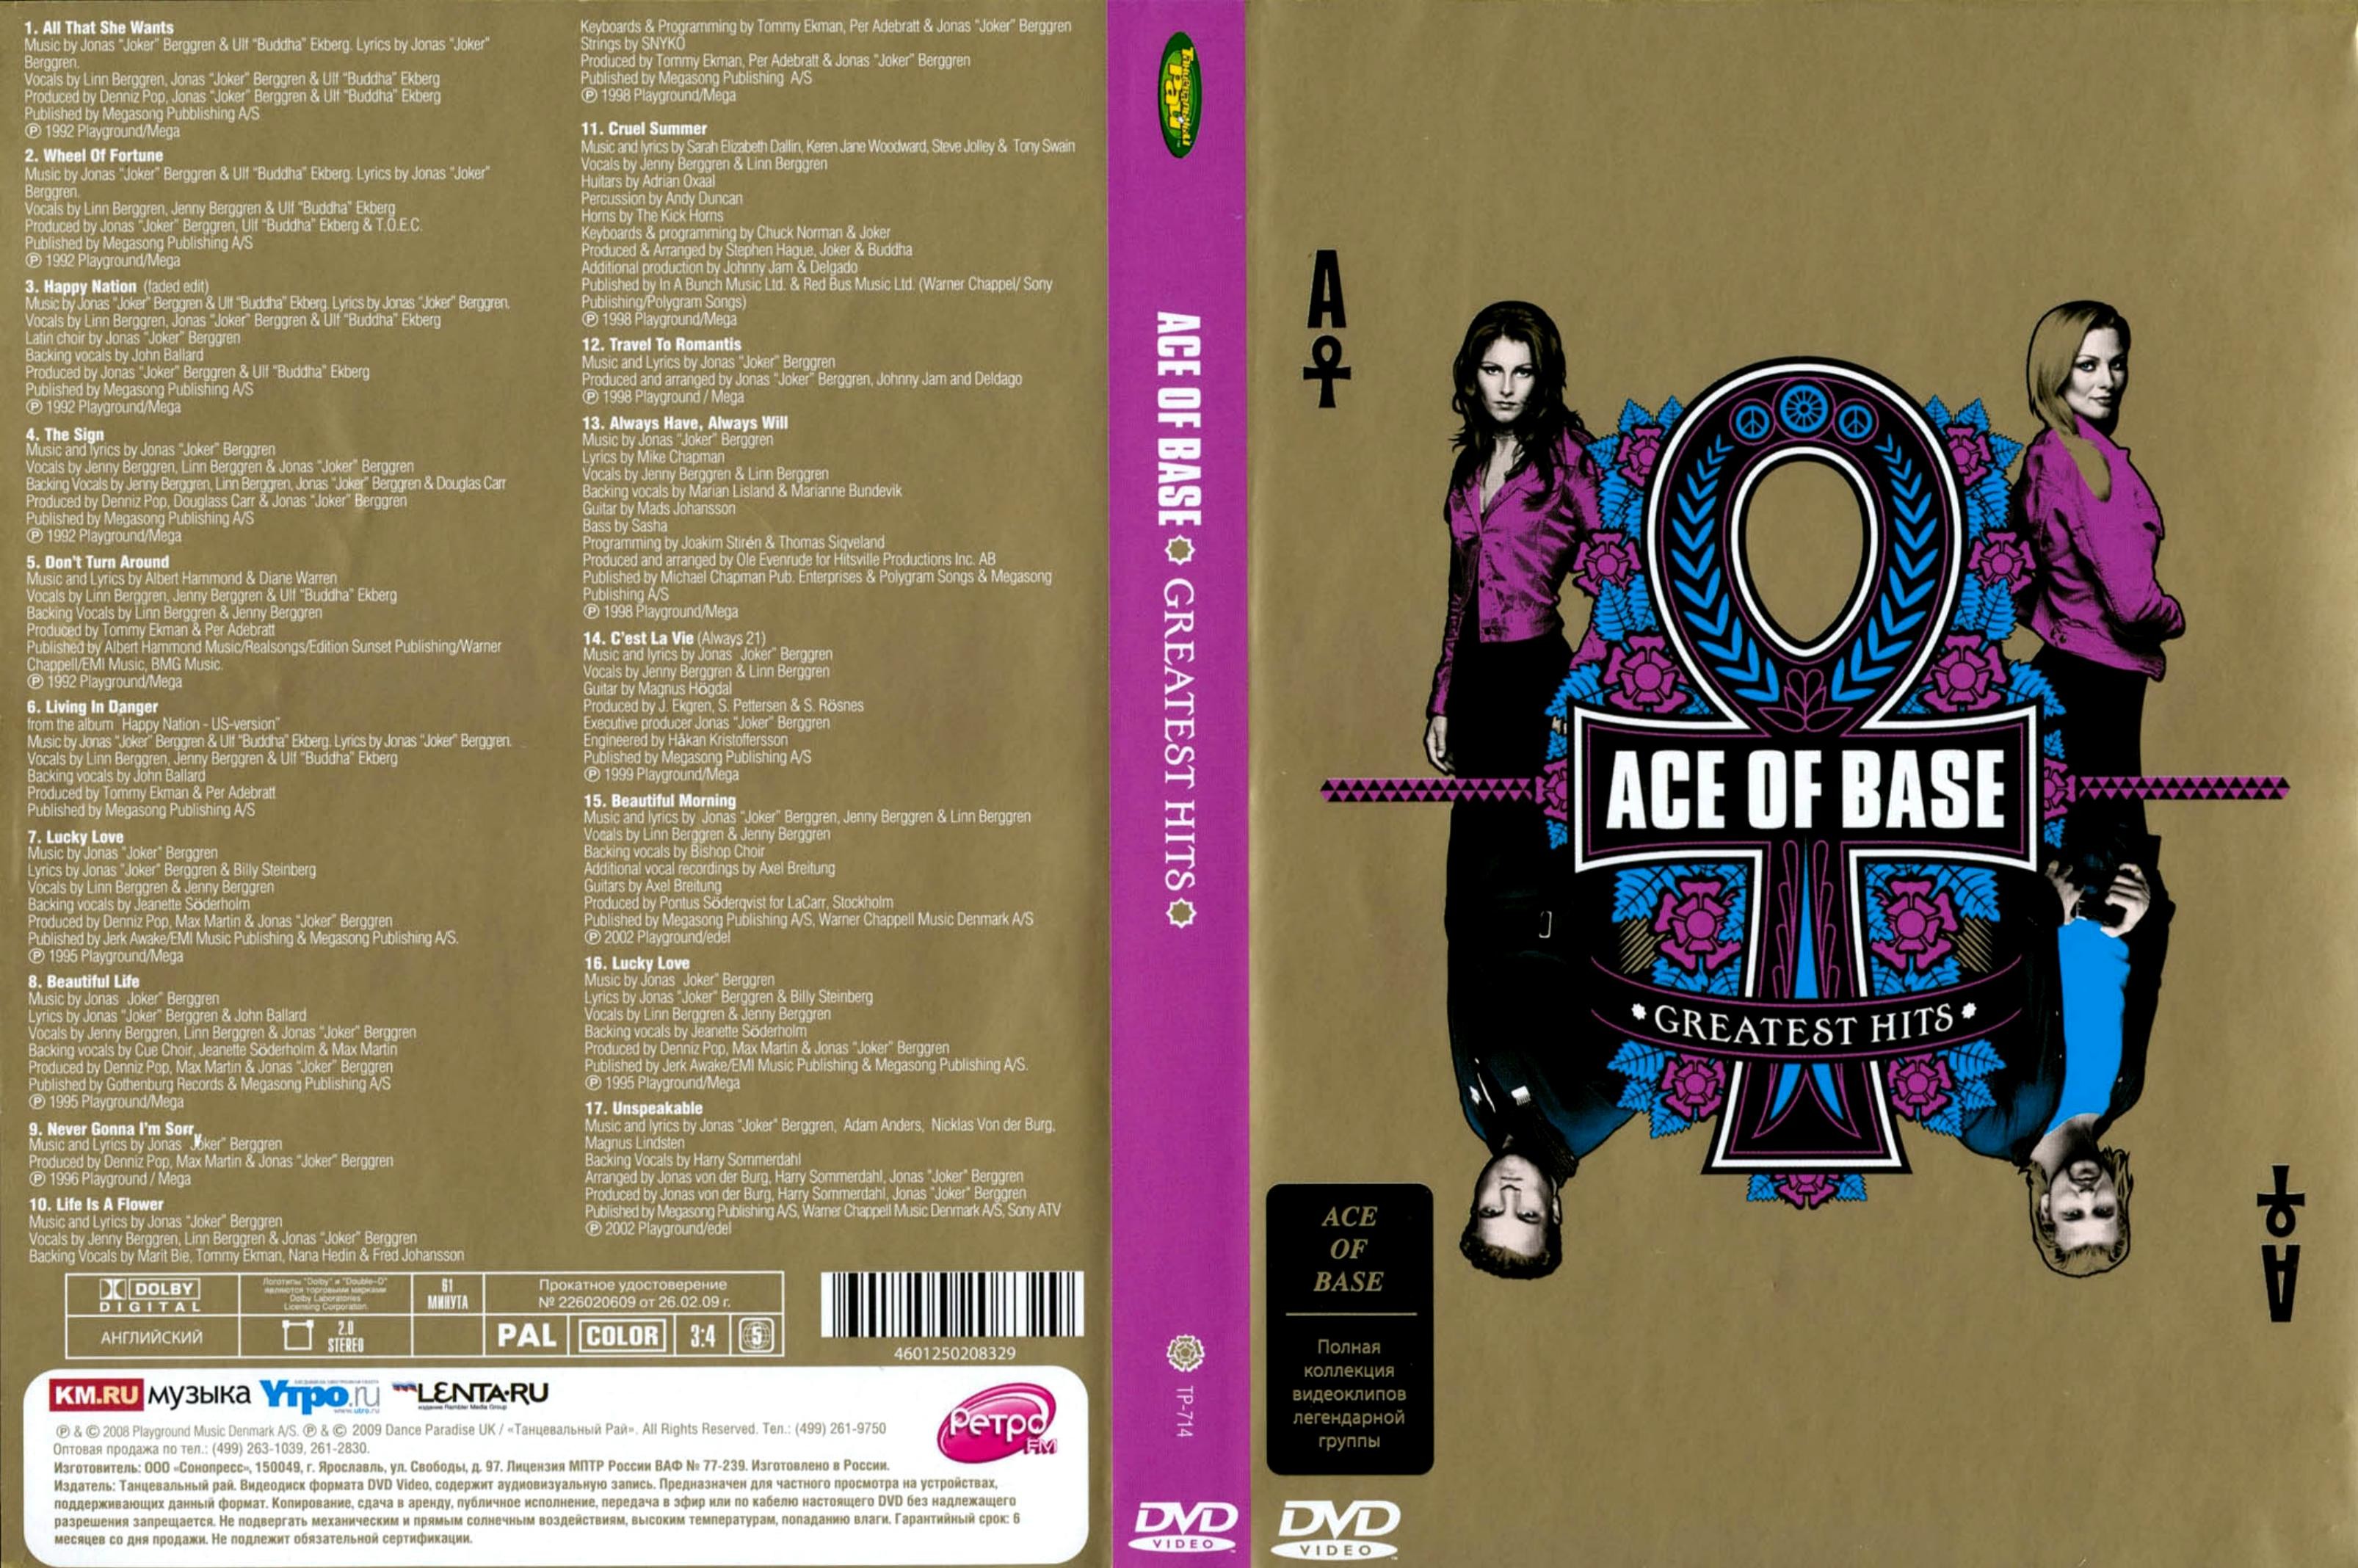 Jaquette DVD Ace of base Greatest hits